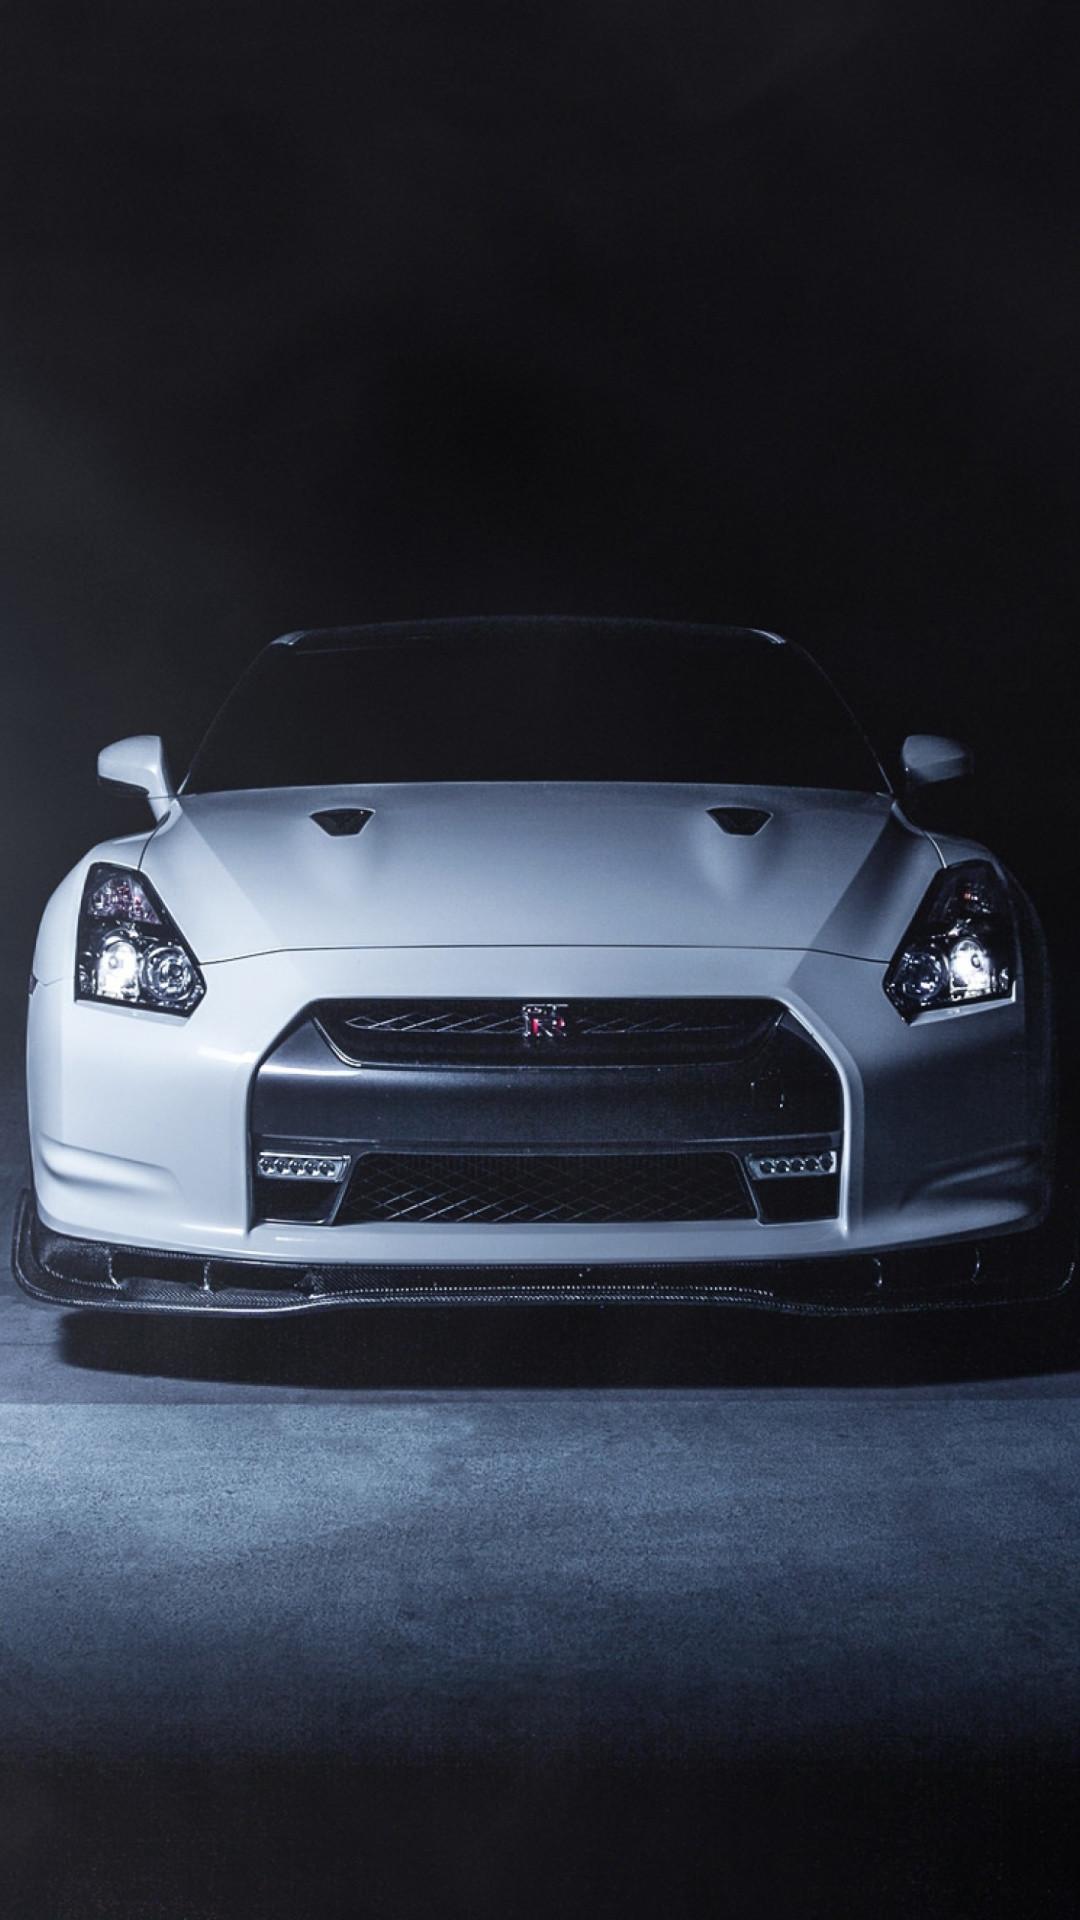 Gtr R35 Photos Download The BEST Free Gtr R35 Stock Photos  HD Images